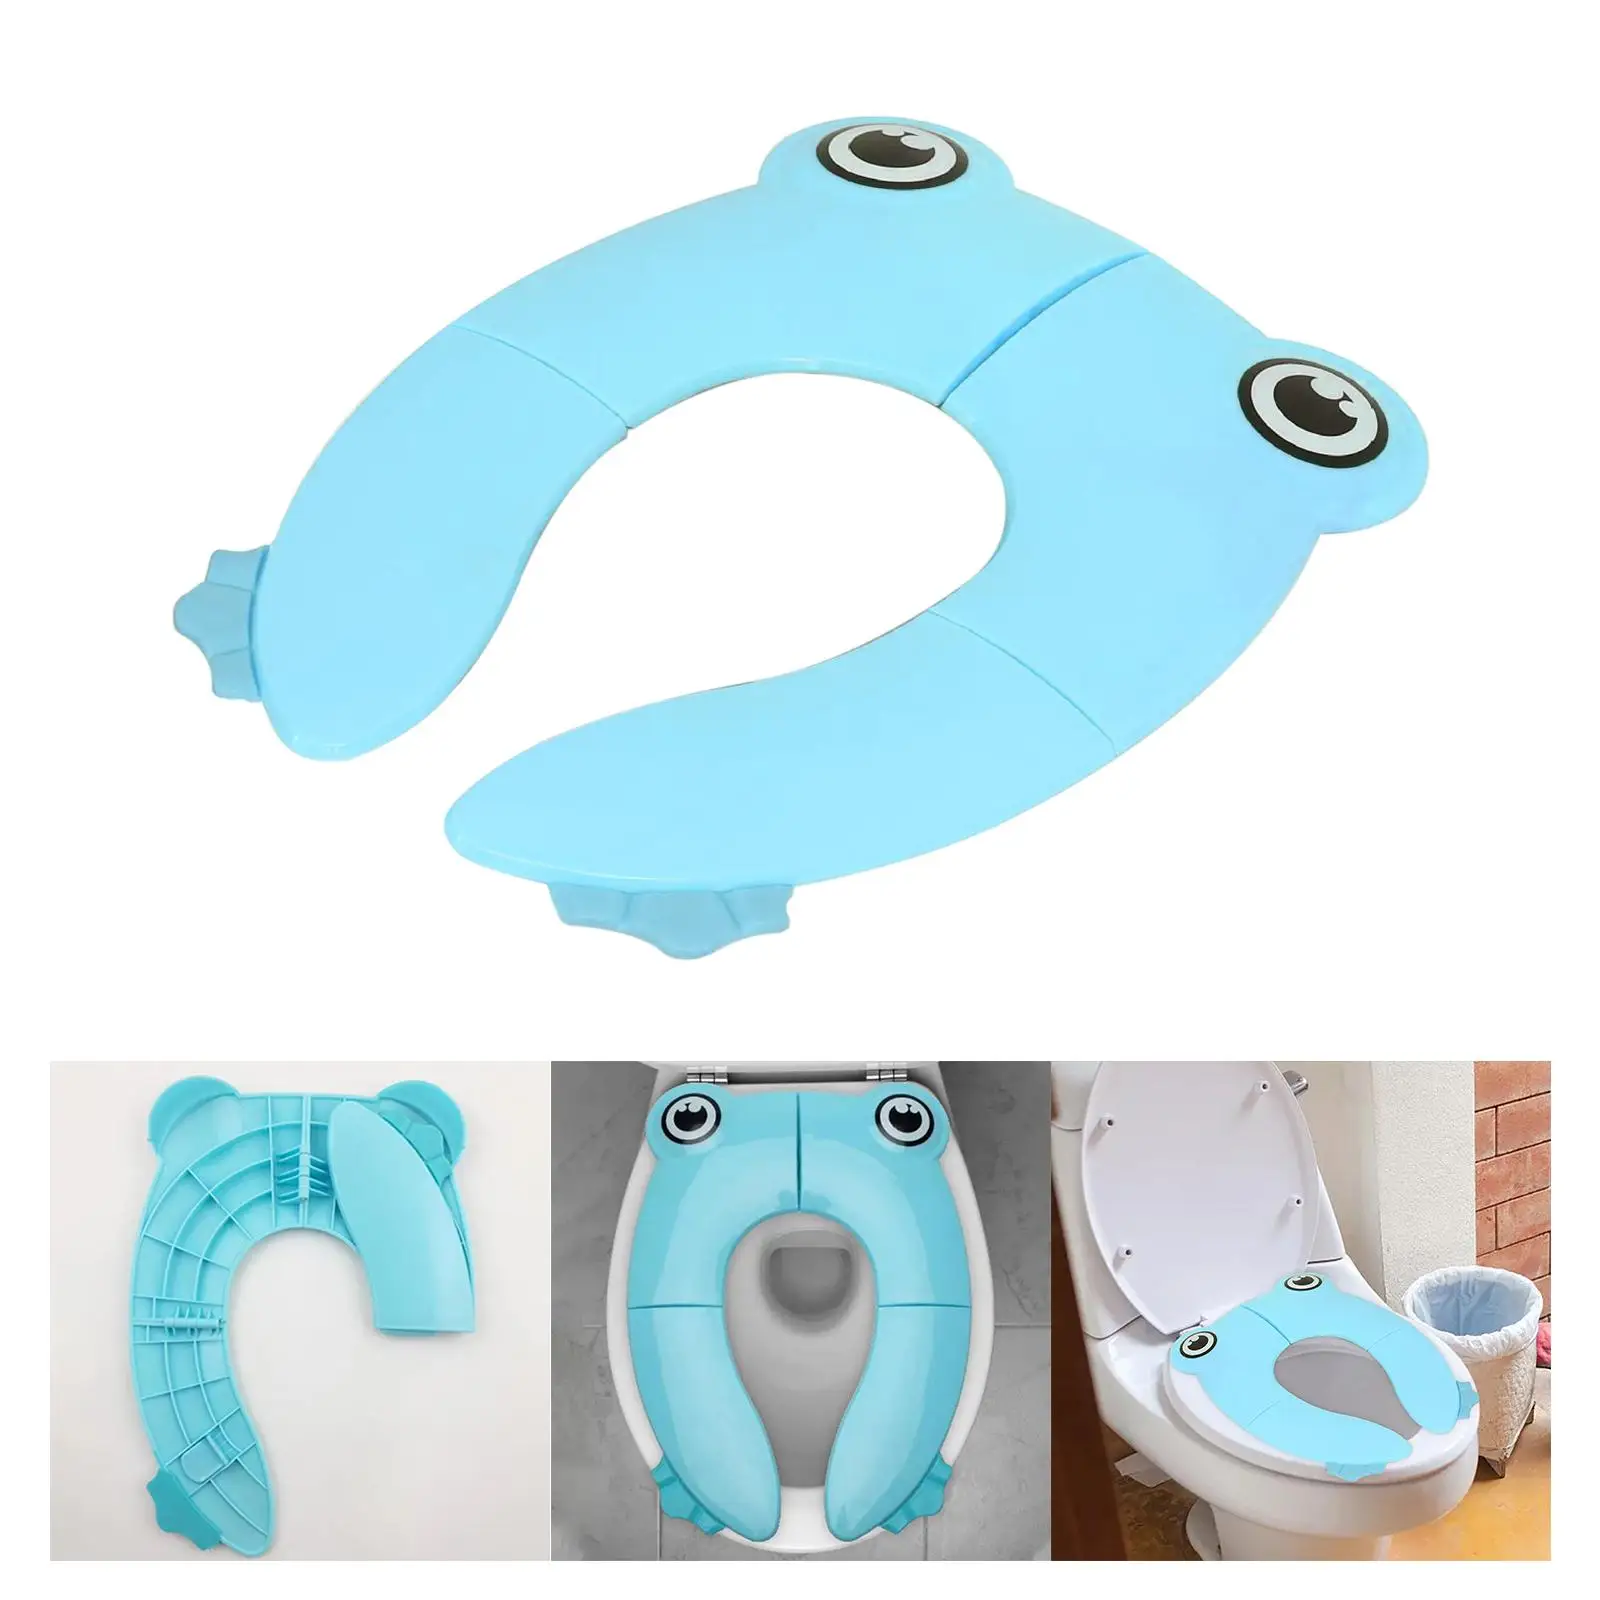 Portable Toilet Seat Pad Comfortable Folding for Camping Home Use Girls Boys